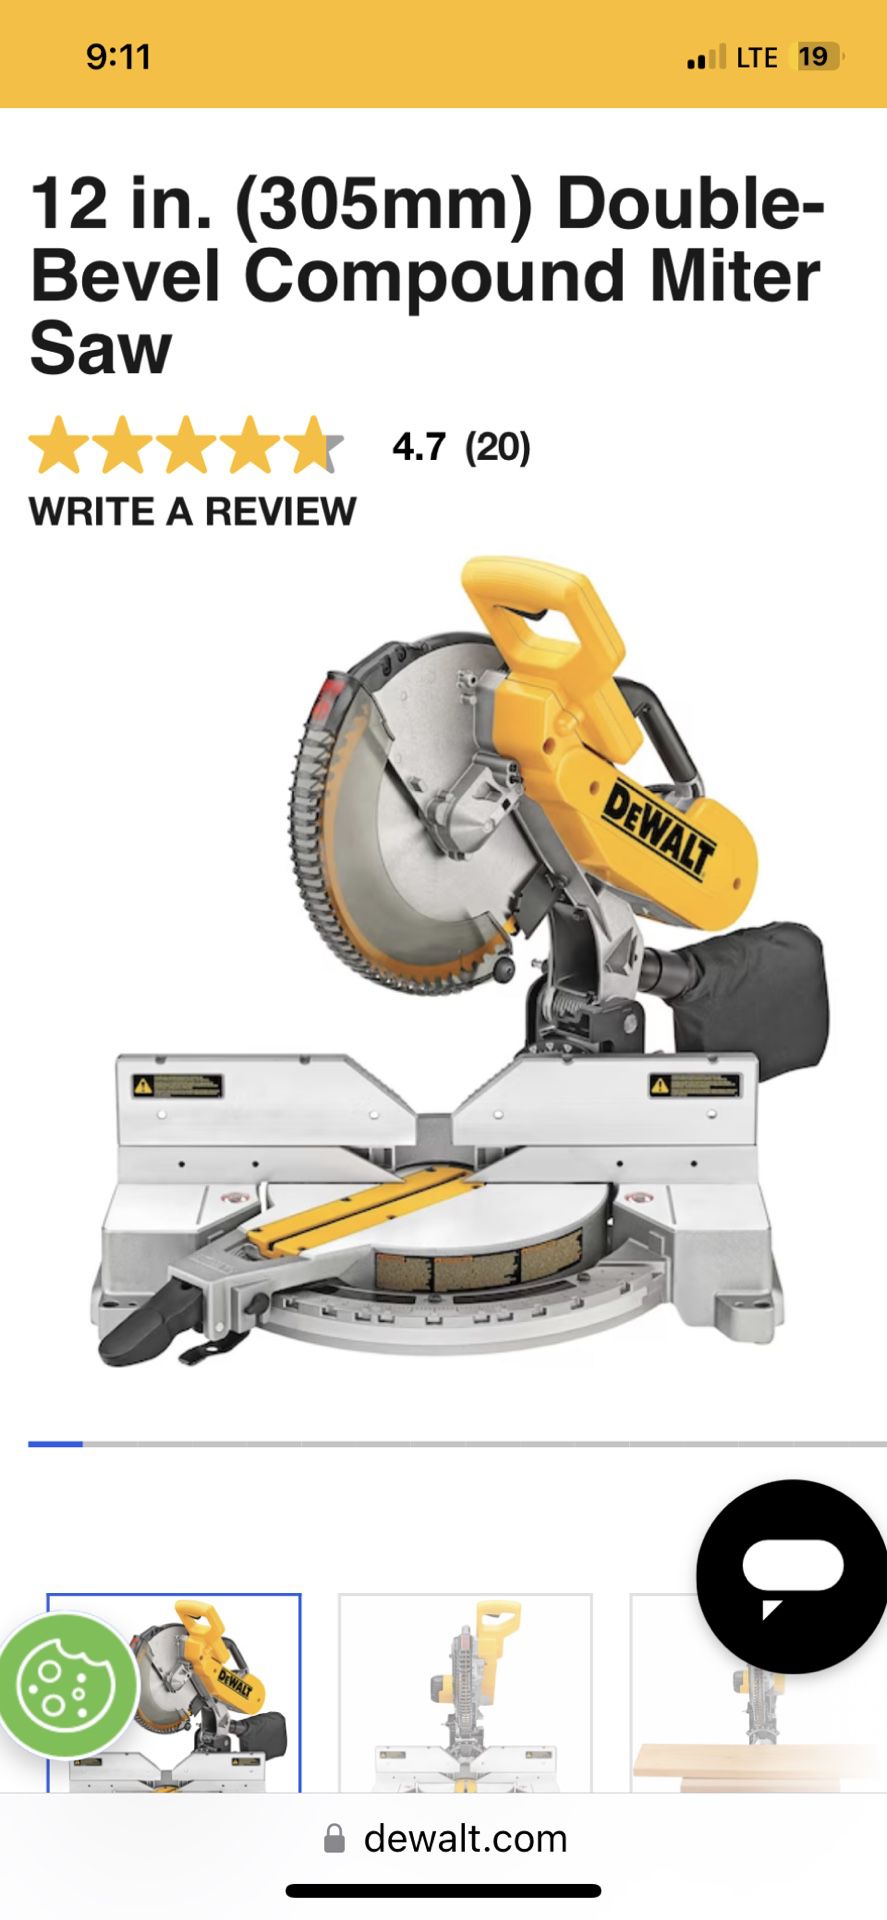 12 in. (305mm) Double-Bevel Compound Miter Saw